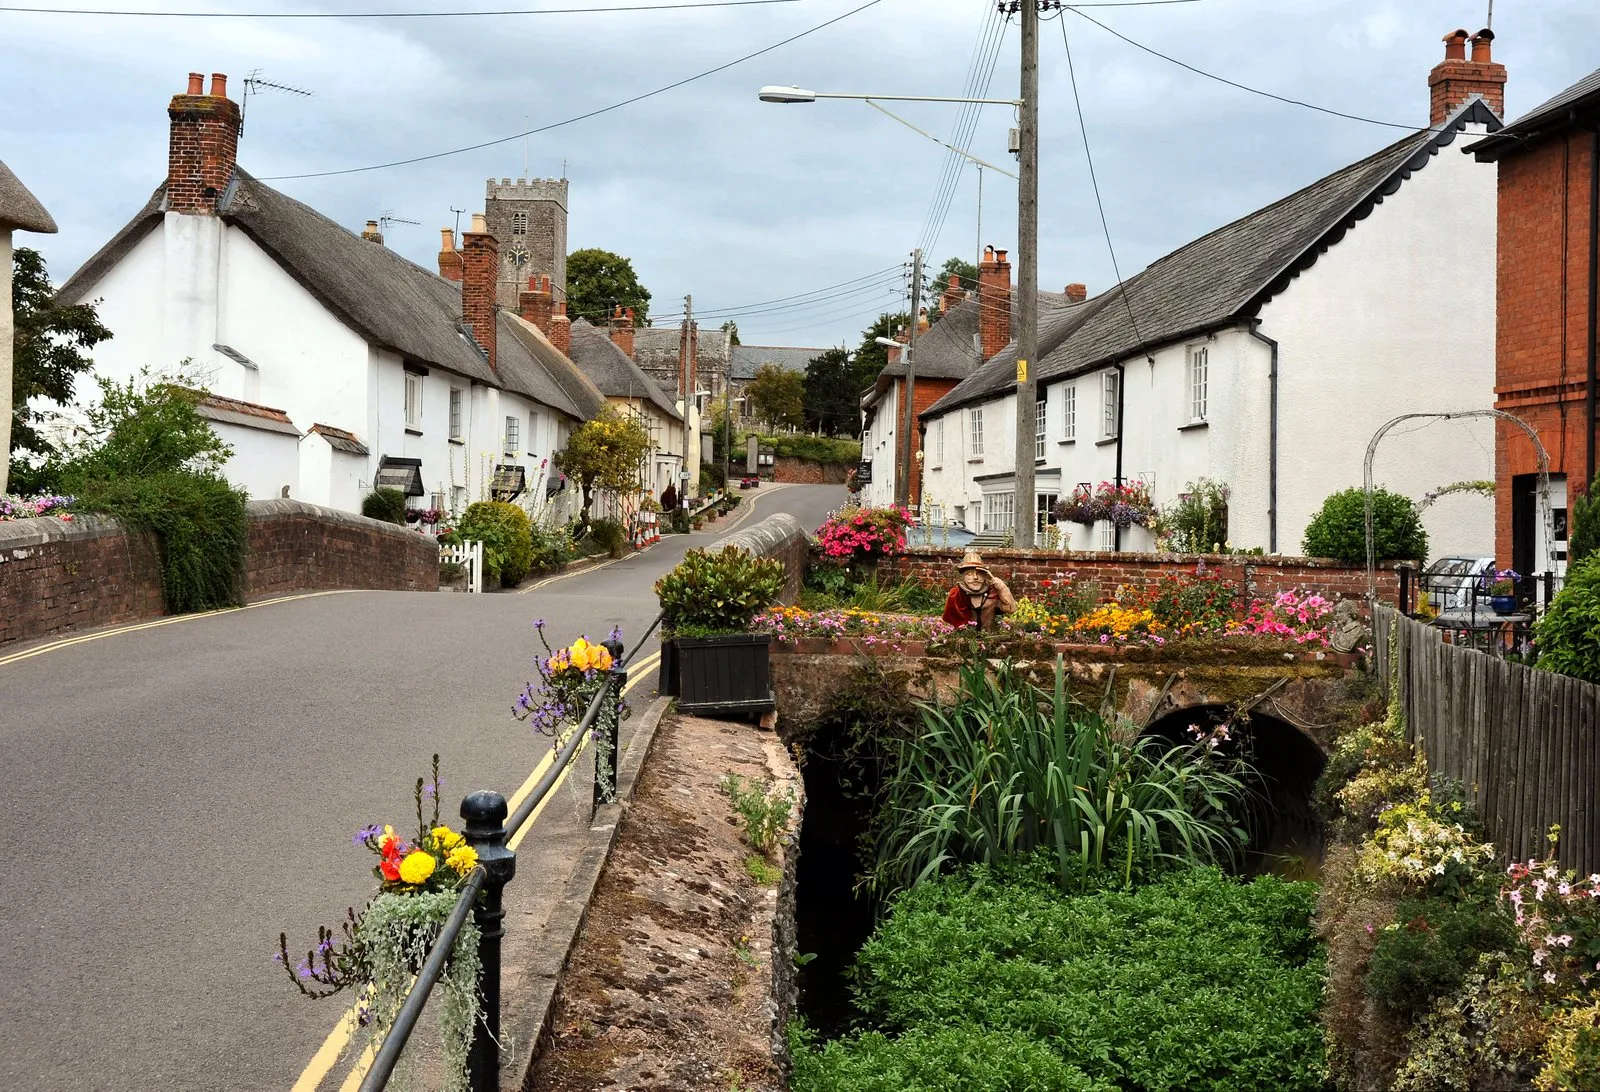 Photo showing: The village of East Budleigh, Devon, England. Looking up High Street towards the church, summer 2010.